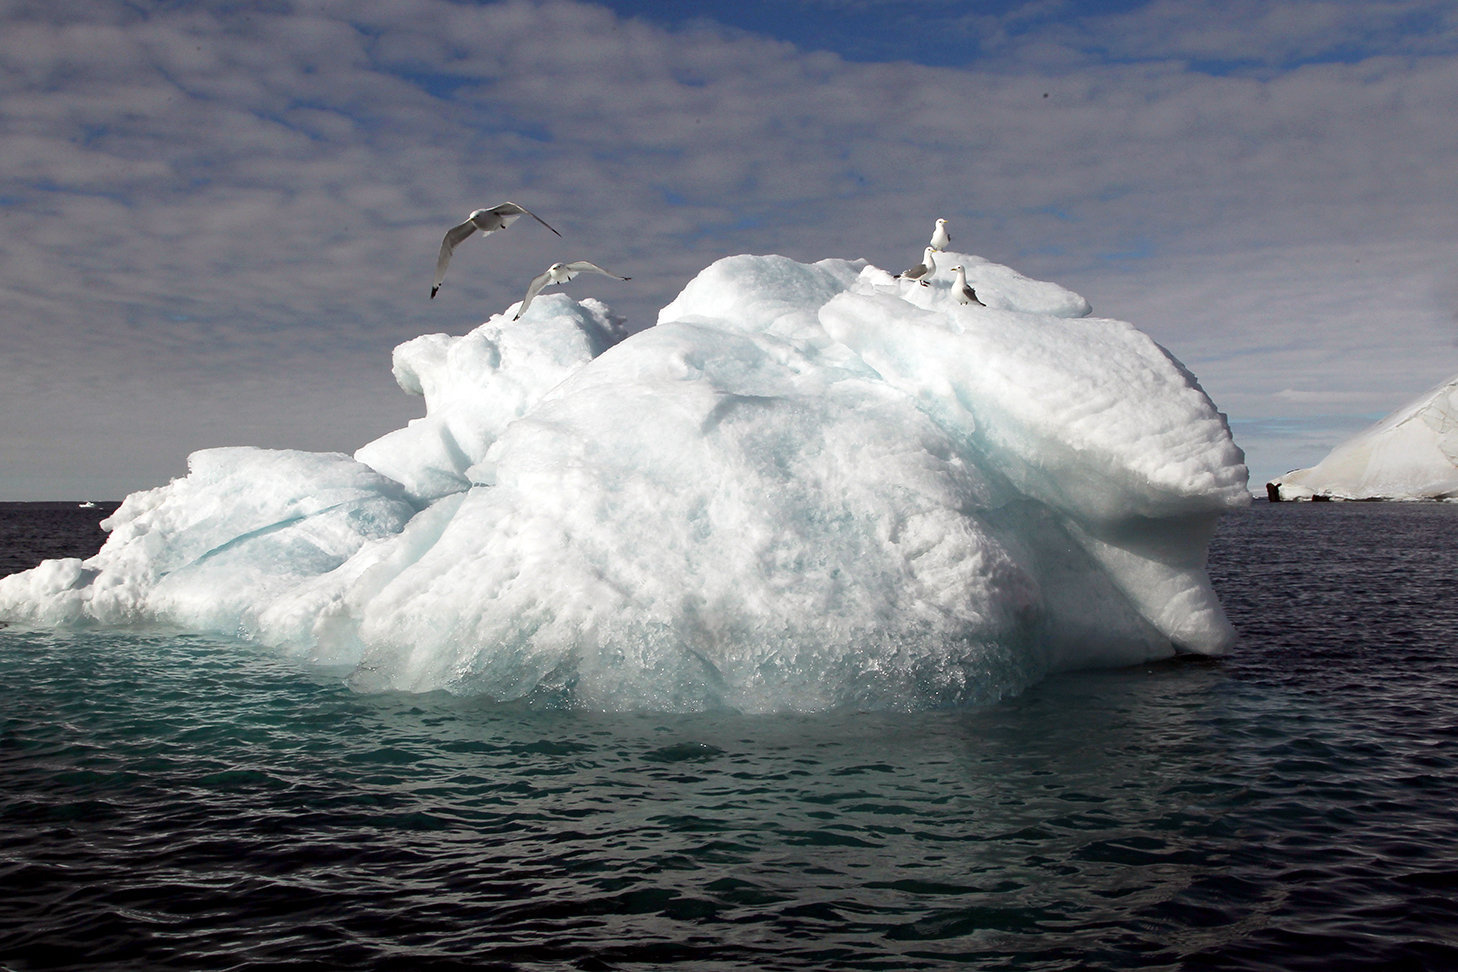 An iceberg in the waters of the Franz Josef Land Archipelago